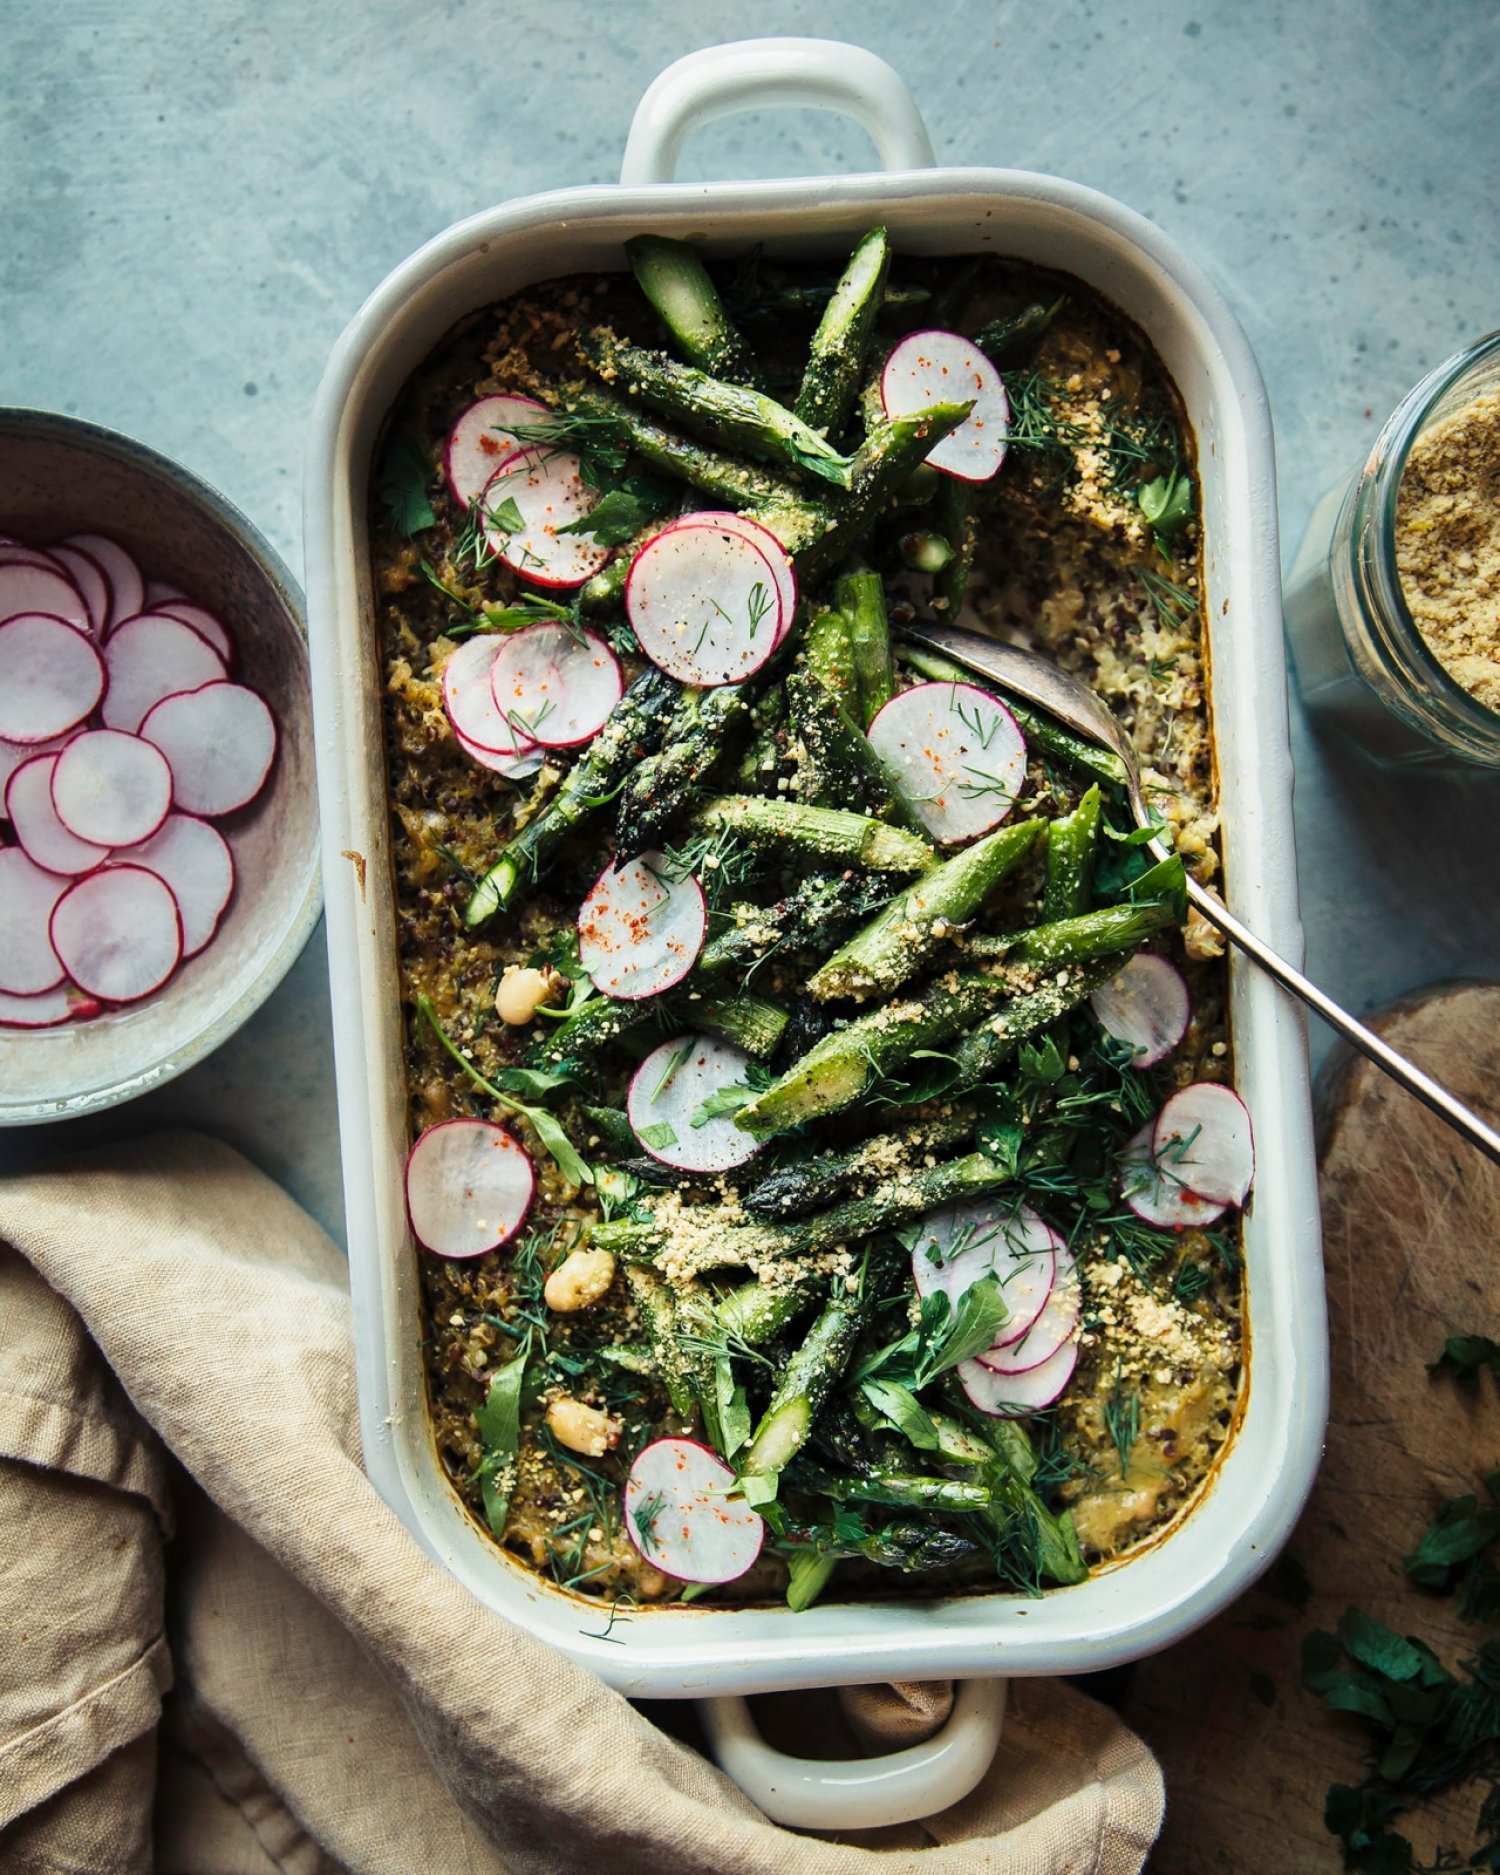 <p>White beans and quinoa provide all the belly-filling plant protein you need in this vibrant vegan-friendly bake with pesto and a host of spring veggies. Topped with fresh radishes for a piquant finishing touch, it makes for a great potluck dish or healthy weeknight dinner. <a href="https://thefirstmess.com/2020/05/13/pesto-quinoa-white-bean-bake-vegan-recipe/" rel="noopener">Get the recipe here.</a></p>